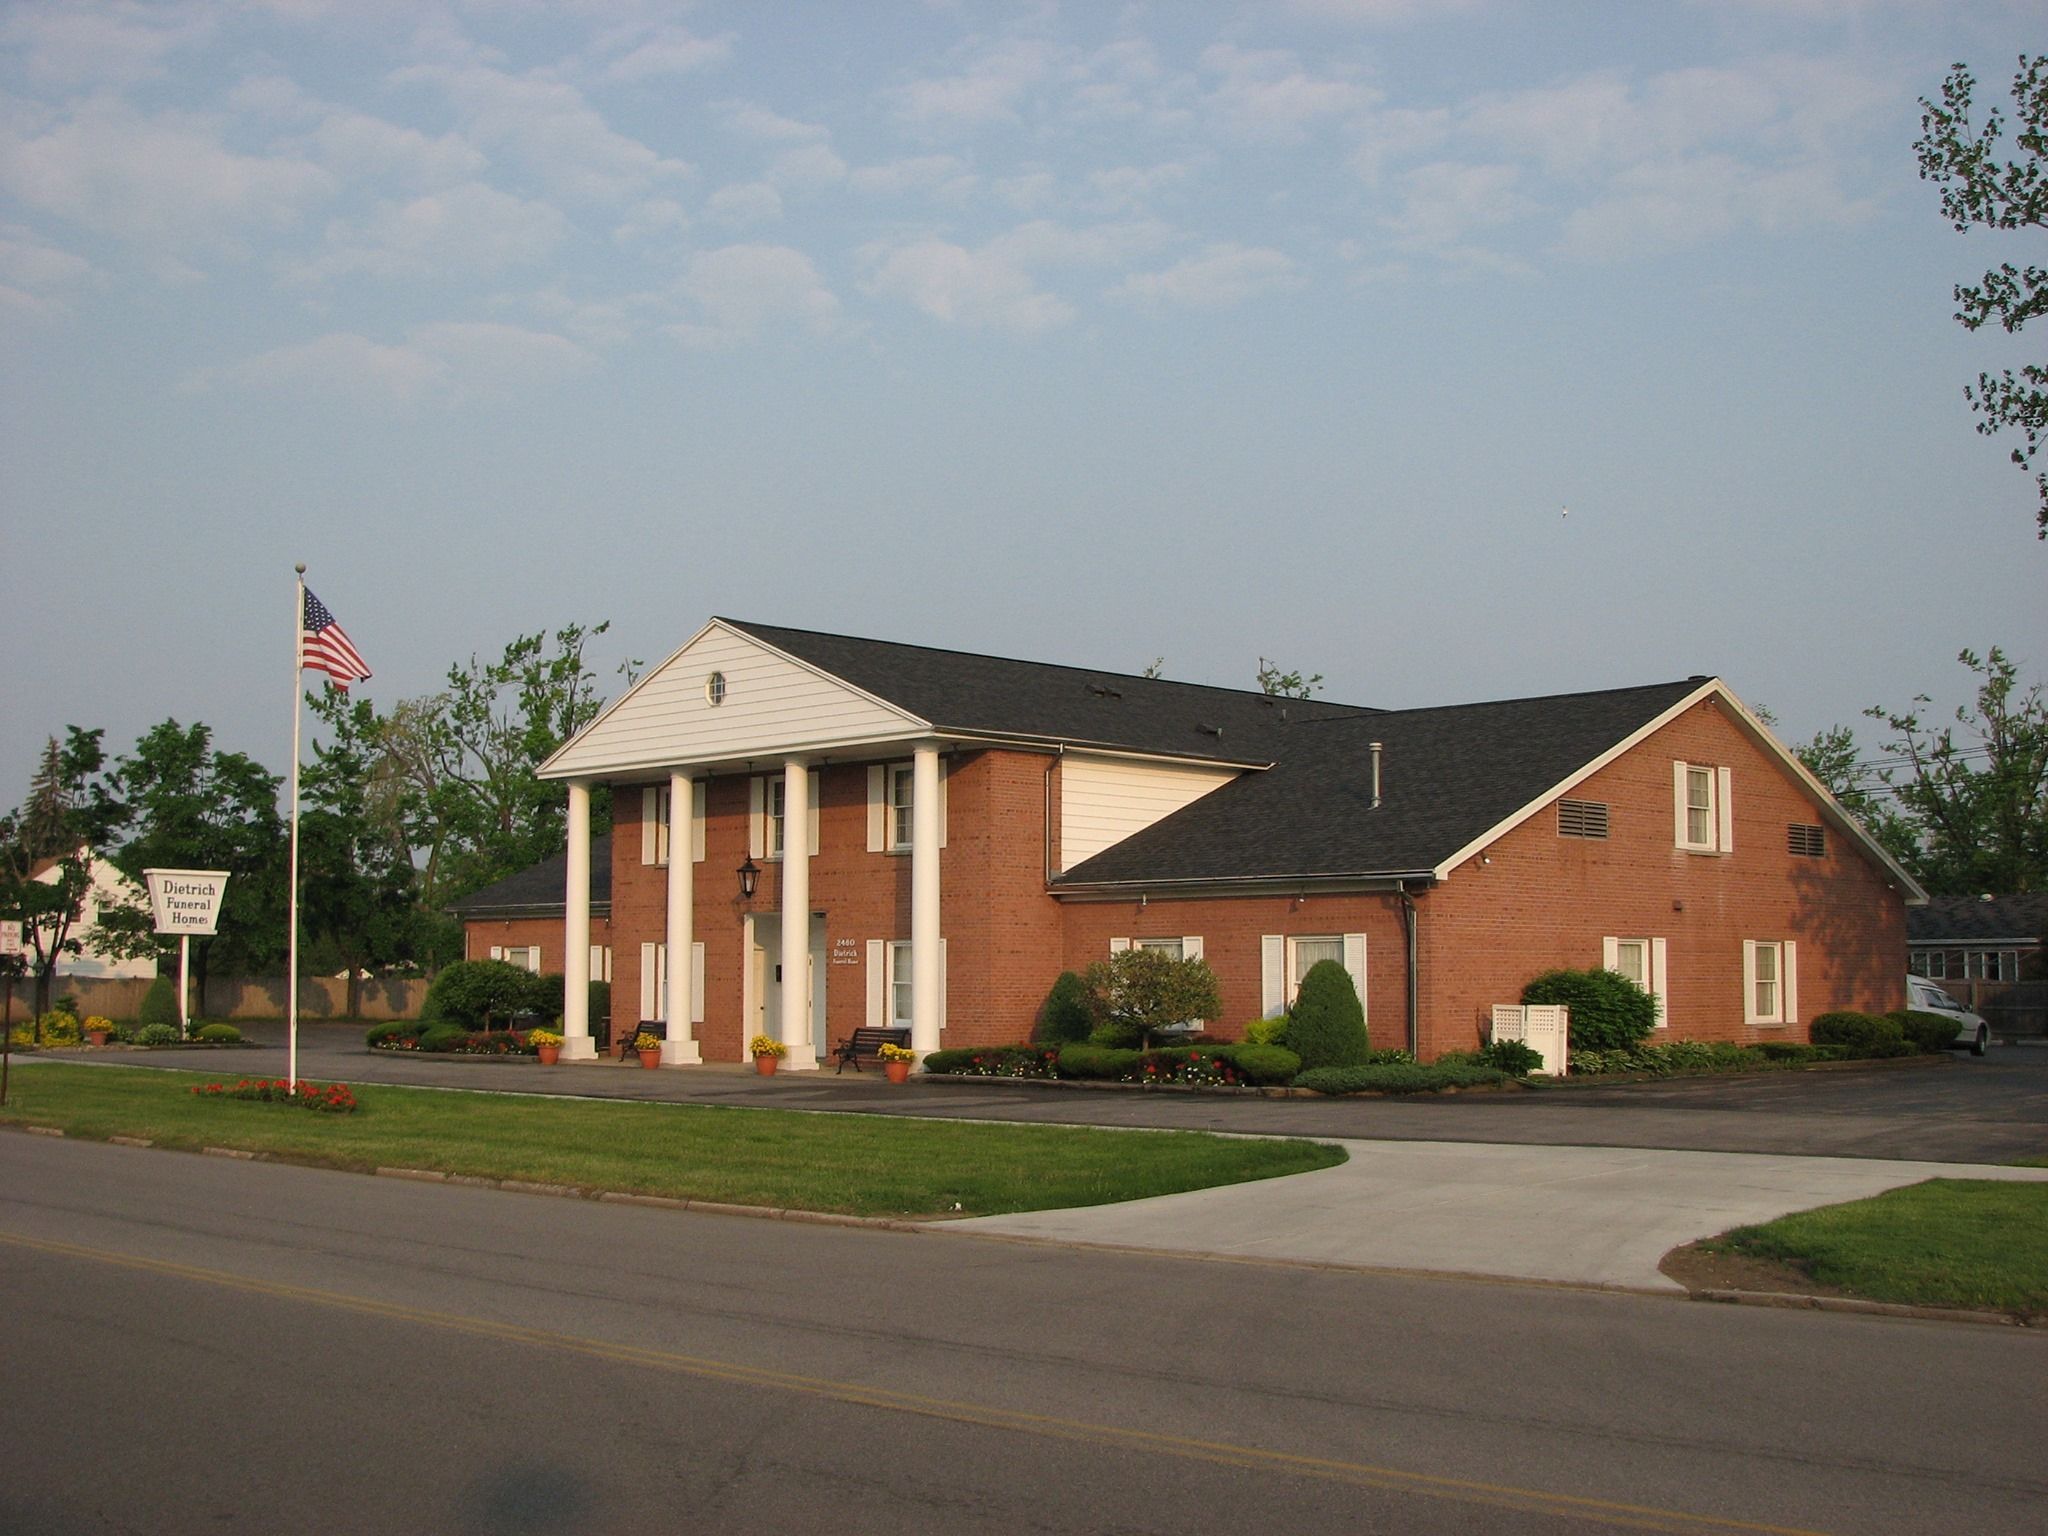 The Dietrich Funeral Home